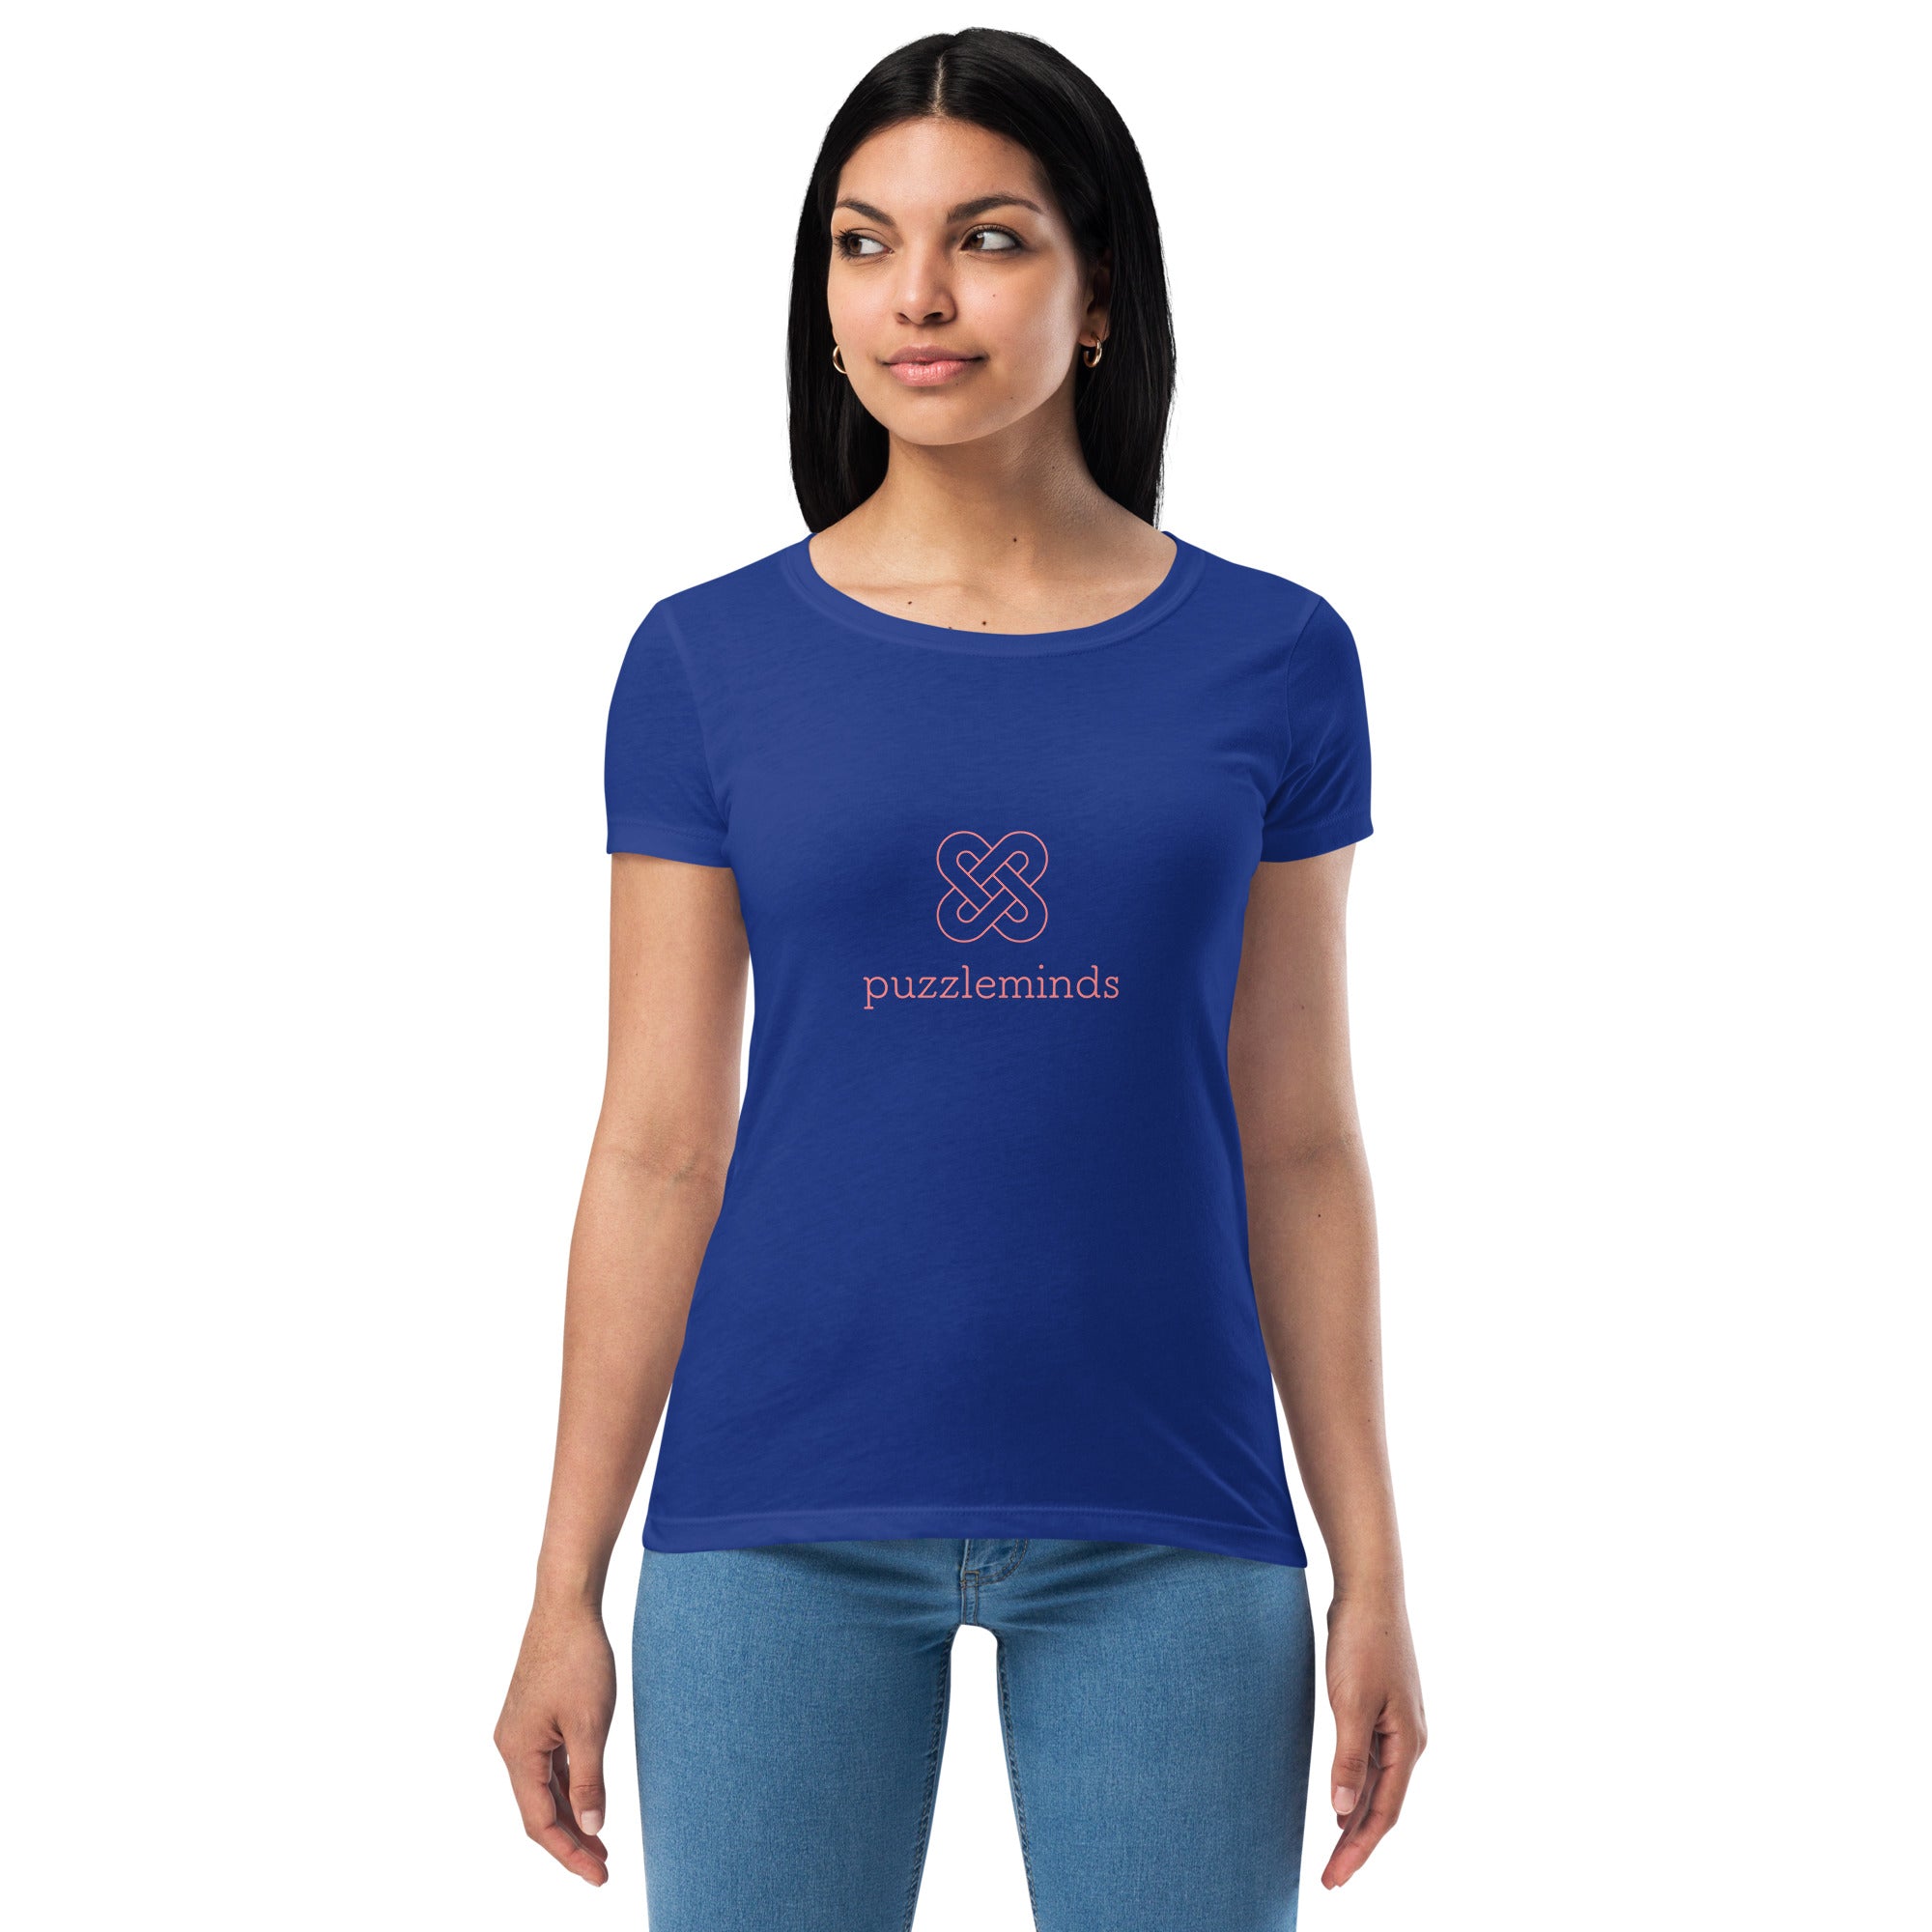 Puzzleminds women’s fitted t-shirt